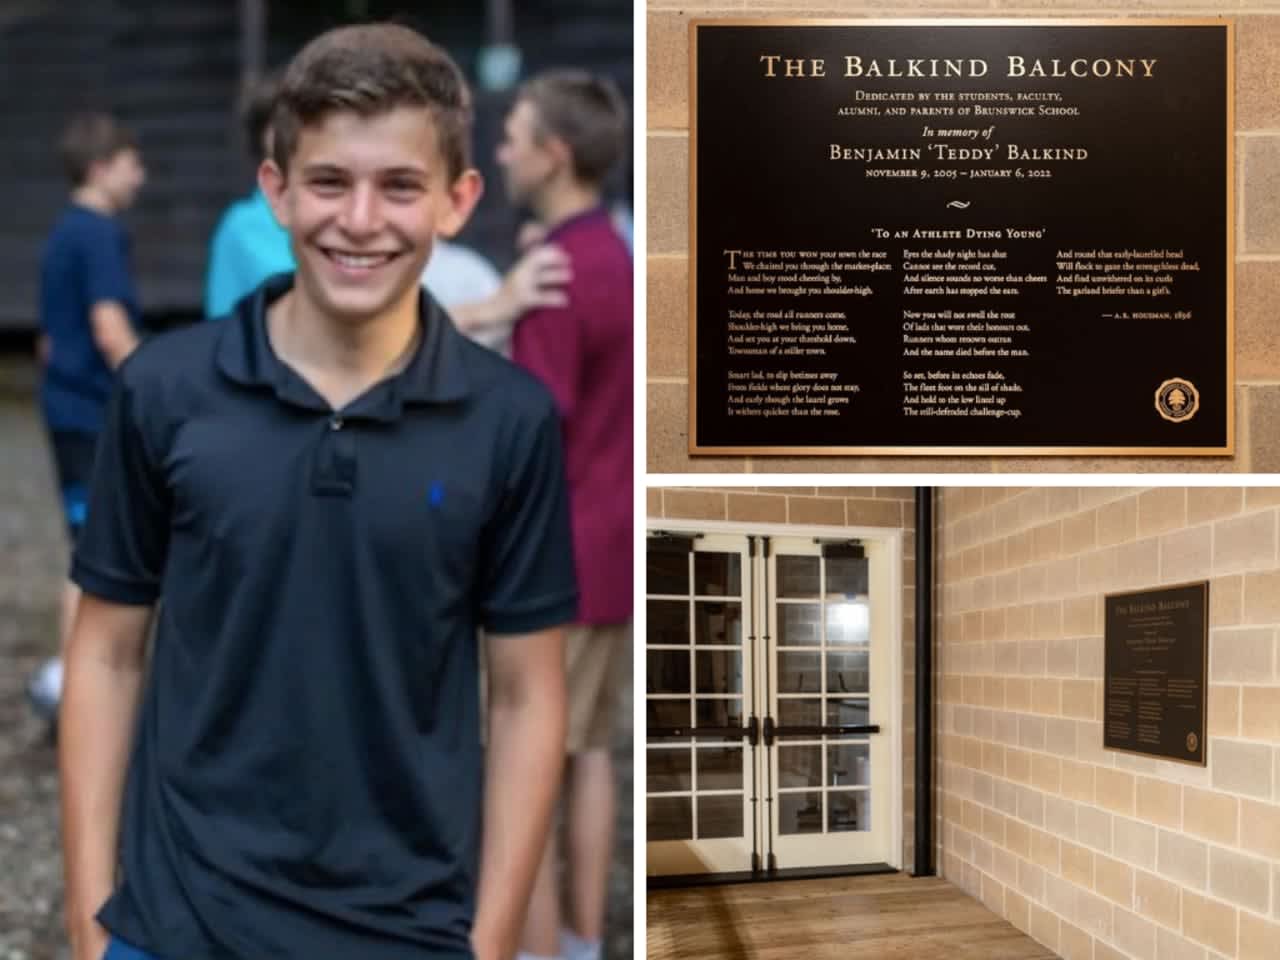 A plaque at Greenwich's Brunswick School honors hockey player Teddy Balkind, who died during a game after colliding with another player.